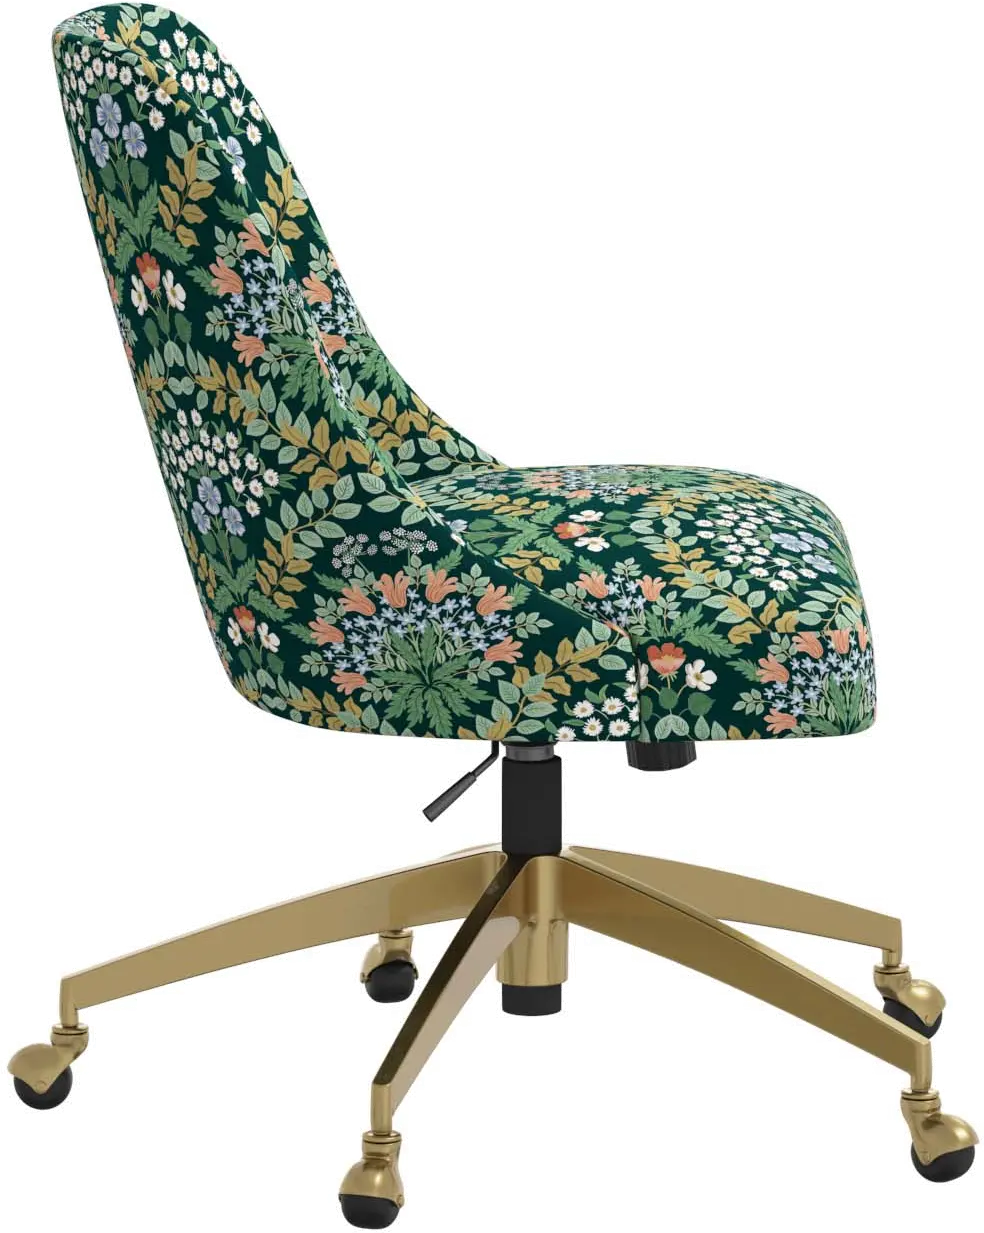 Rifle Paper Co. Oxford Bramble Emerald Office Chair